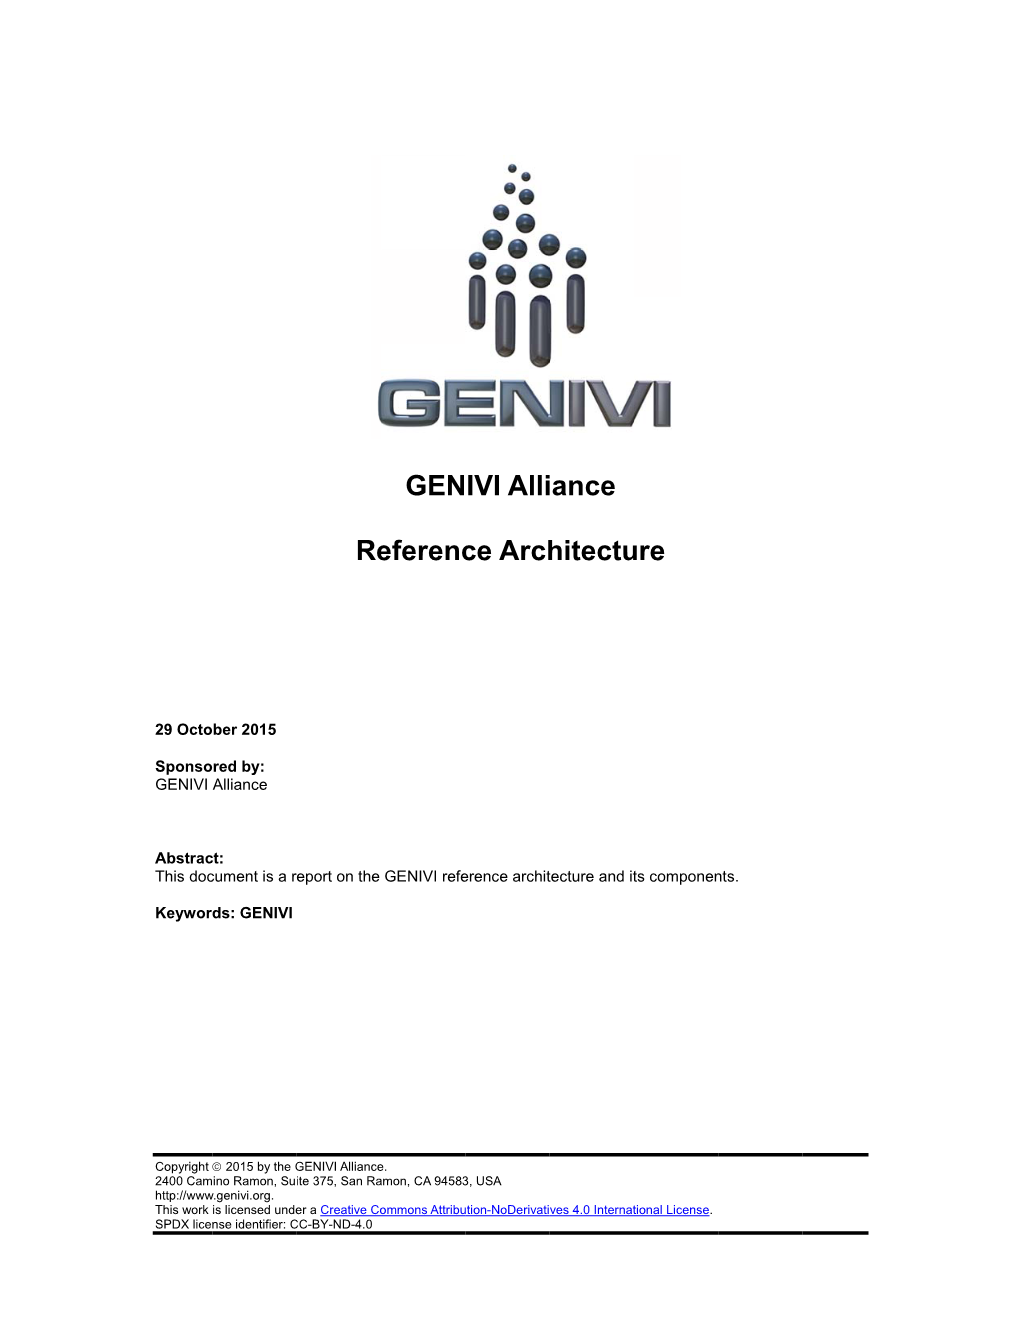 GENIVI Reference Architecture and Its Components